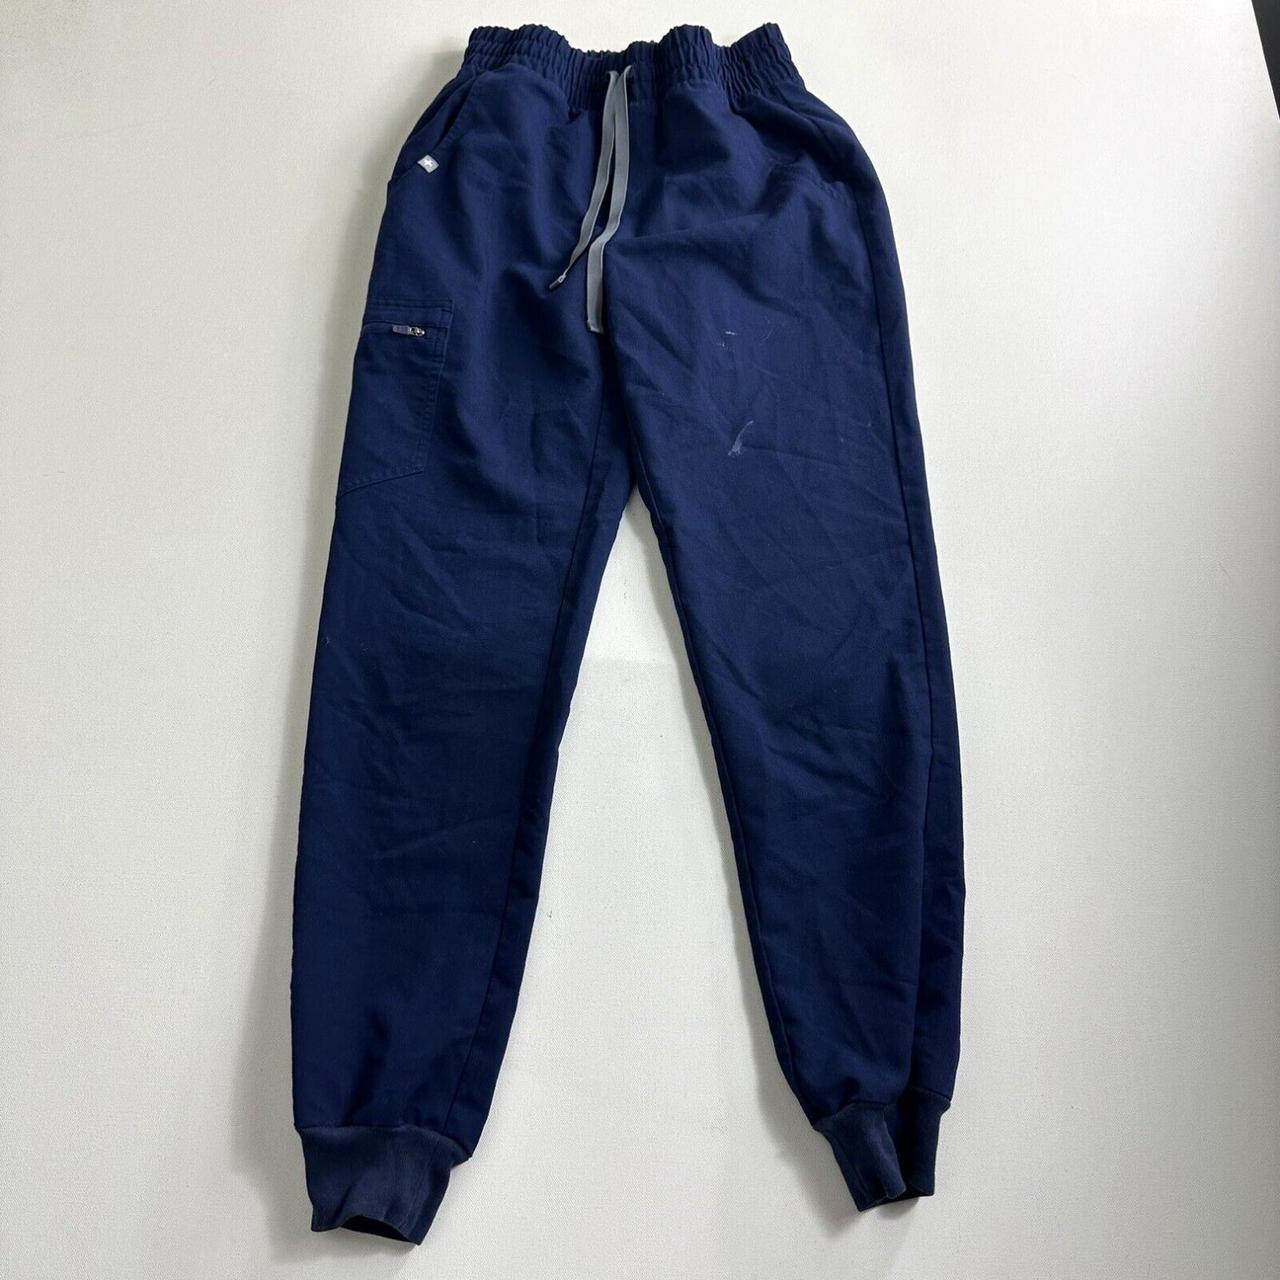 item listed by unsurfacedvtg